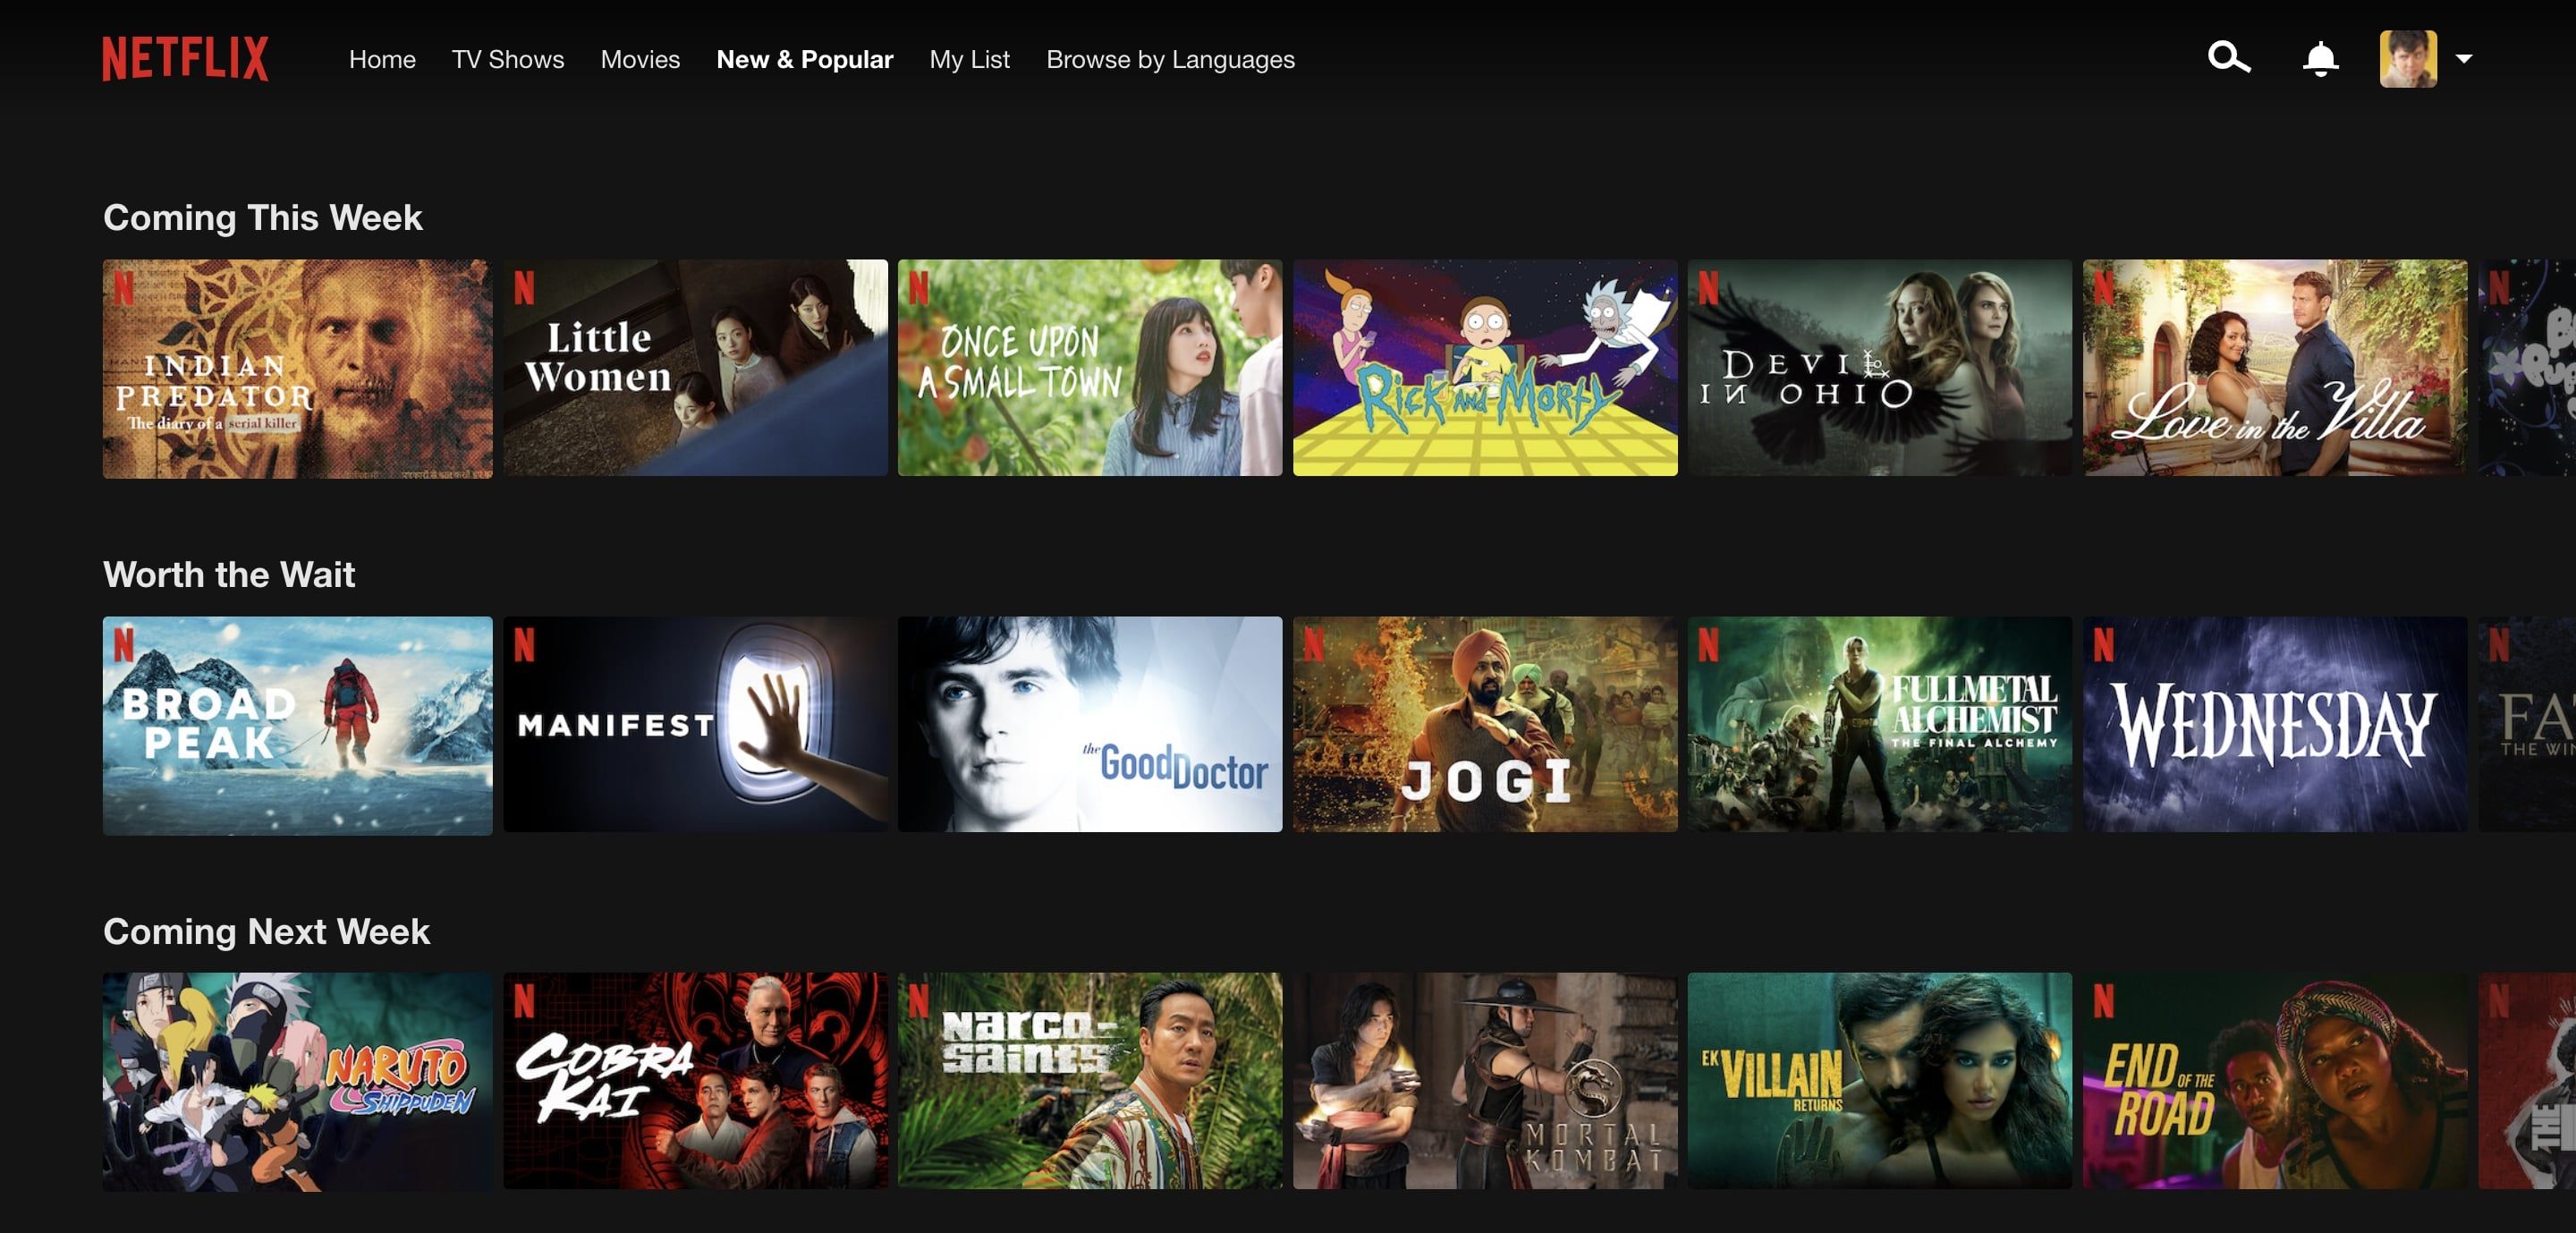 Netflix website showing TV shows and movies in rows